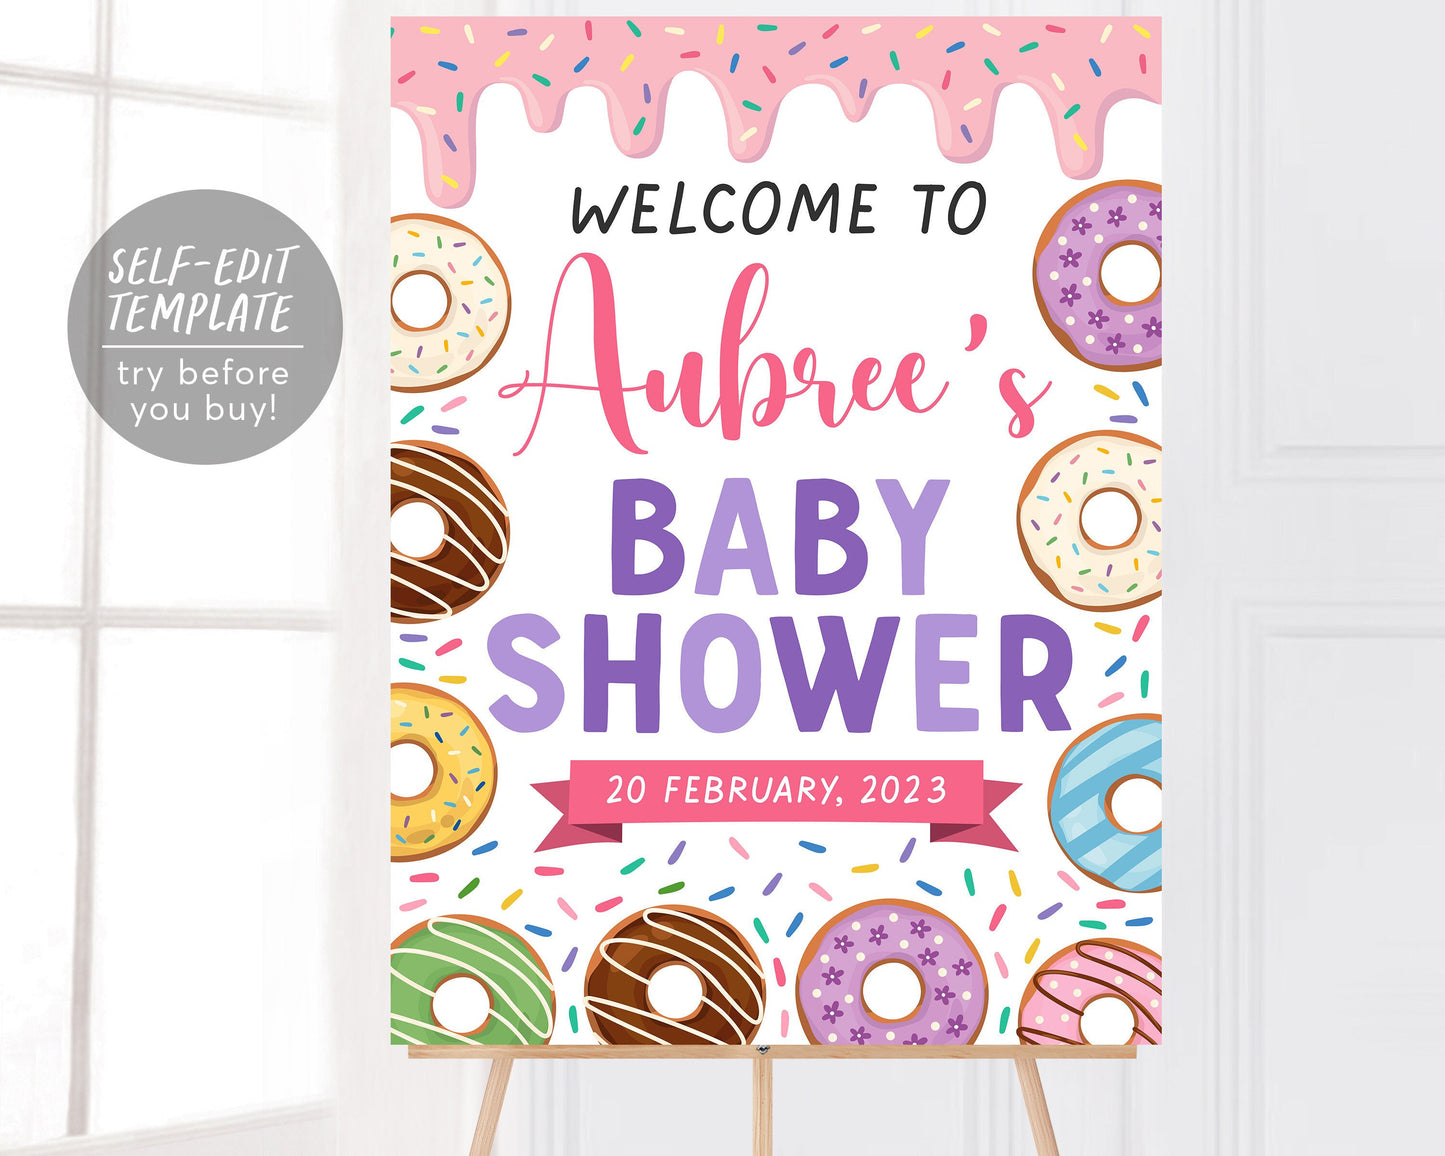 Pink Donut Welcome Sign Editable Template, Sprinkle Baby Shower Sign, Doughnut Themed Poster Signage Decor Printable Instant Download